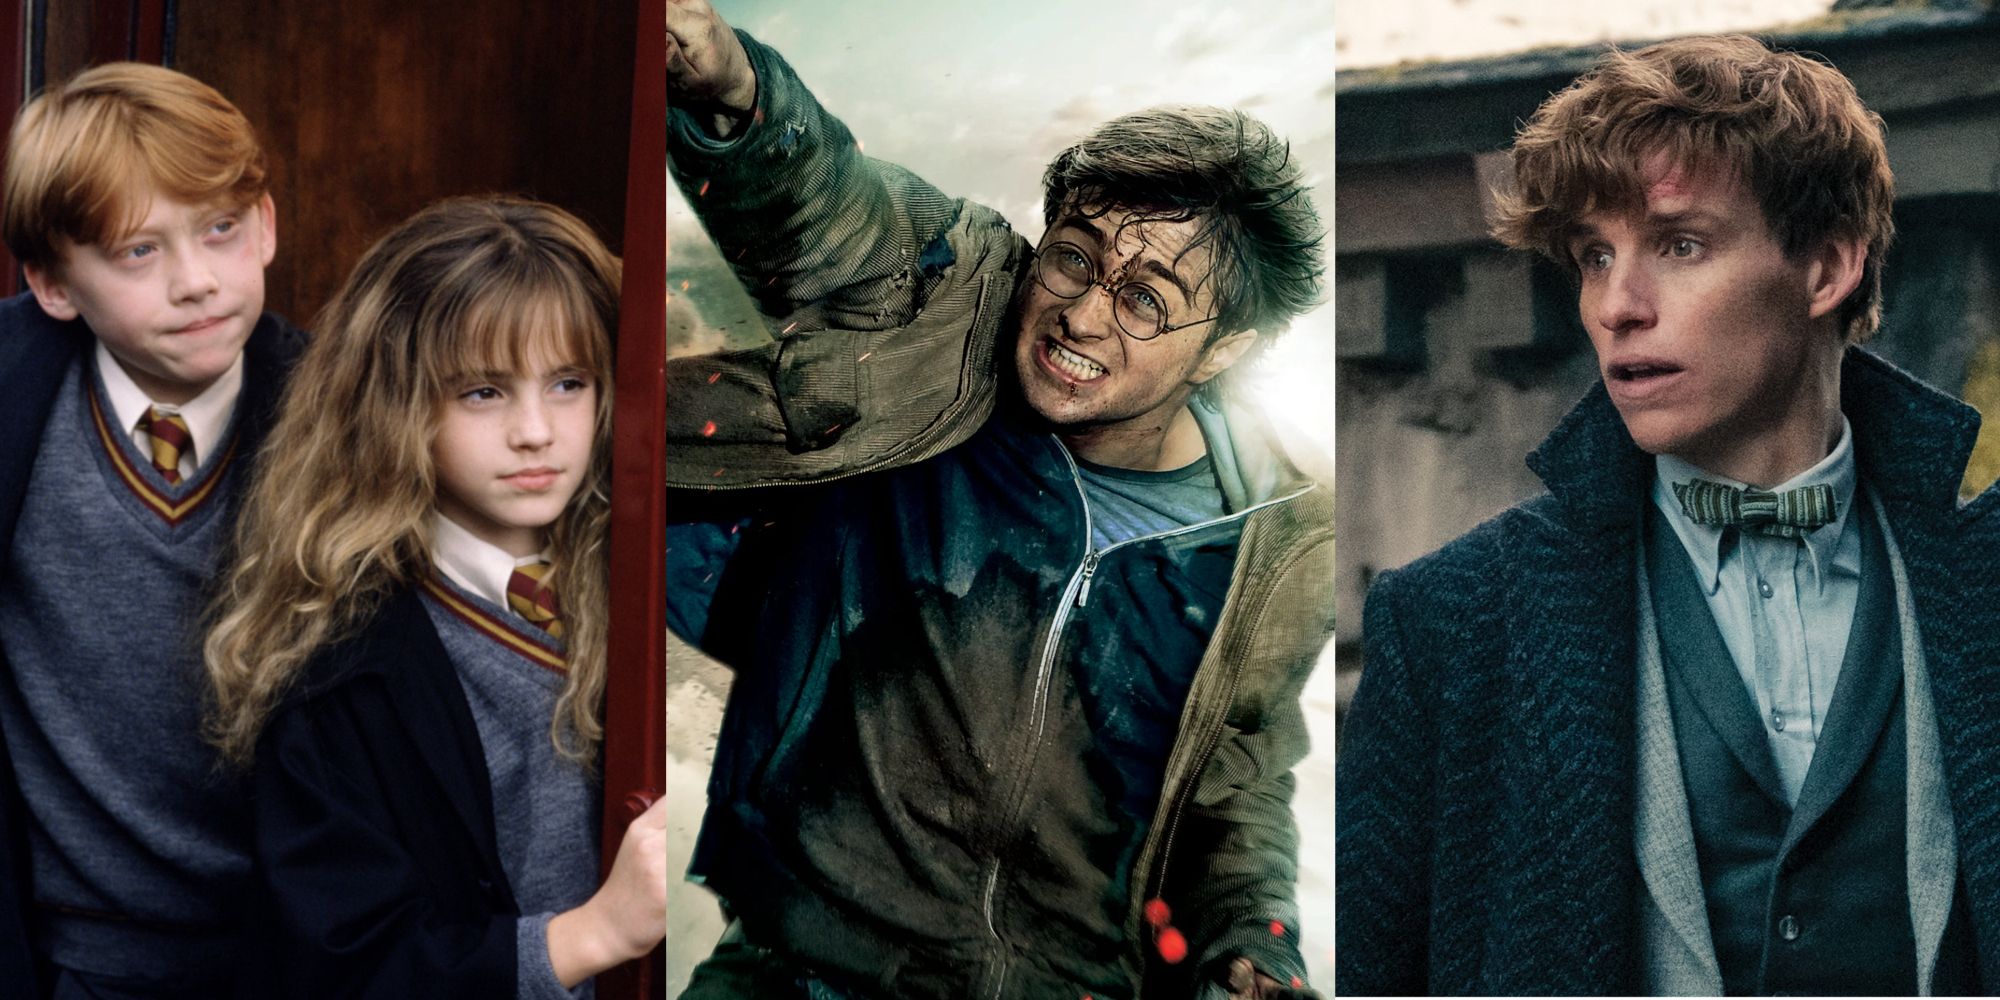 A split image of Ron and Hermione in Philosopher's Stone, Harry Potter in Deathly Hallows, and Newt Scamander in Fantastic Beasts